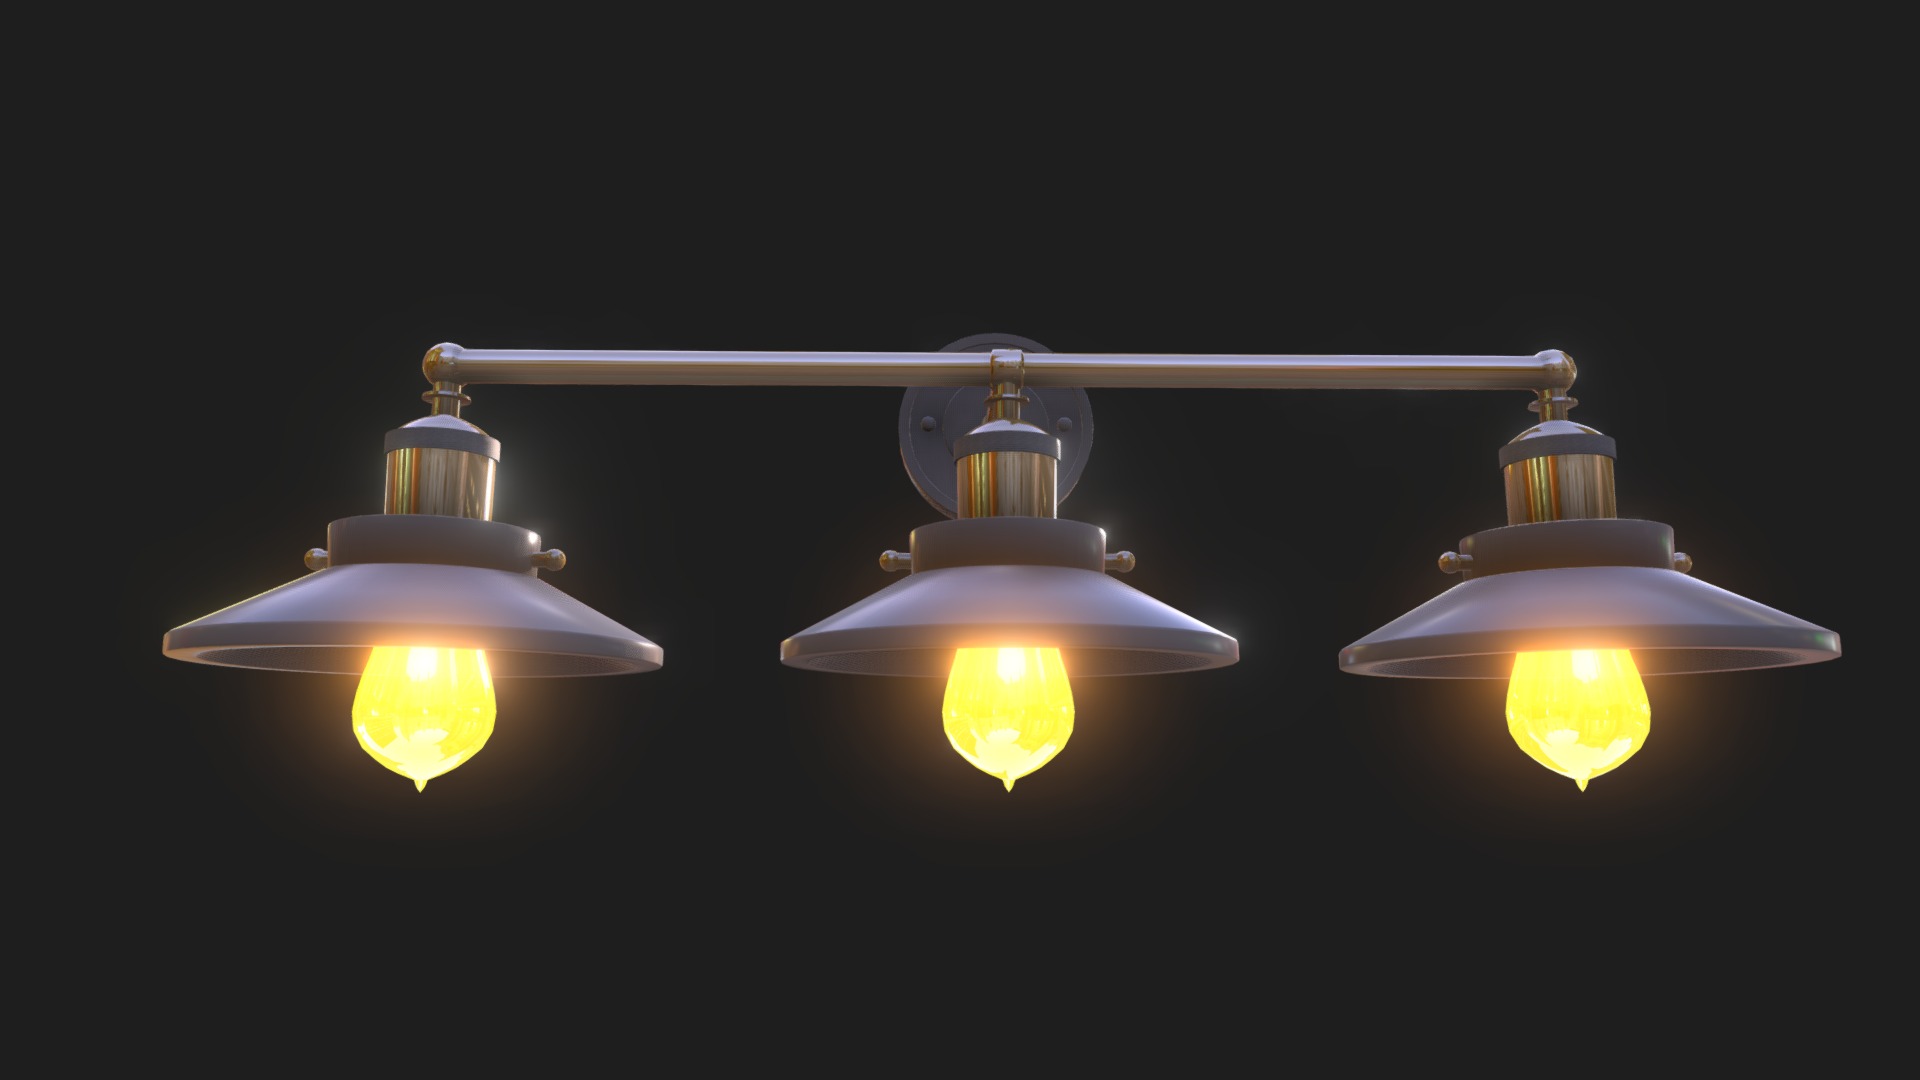 3D model HGPBR-32 - This is a 3D model of the HGPBR-32. The 3D model is about a group of light bulbs.